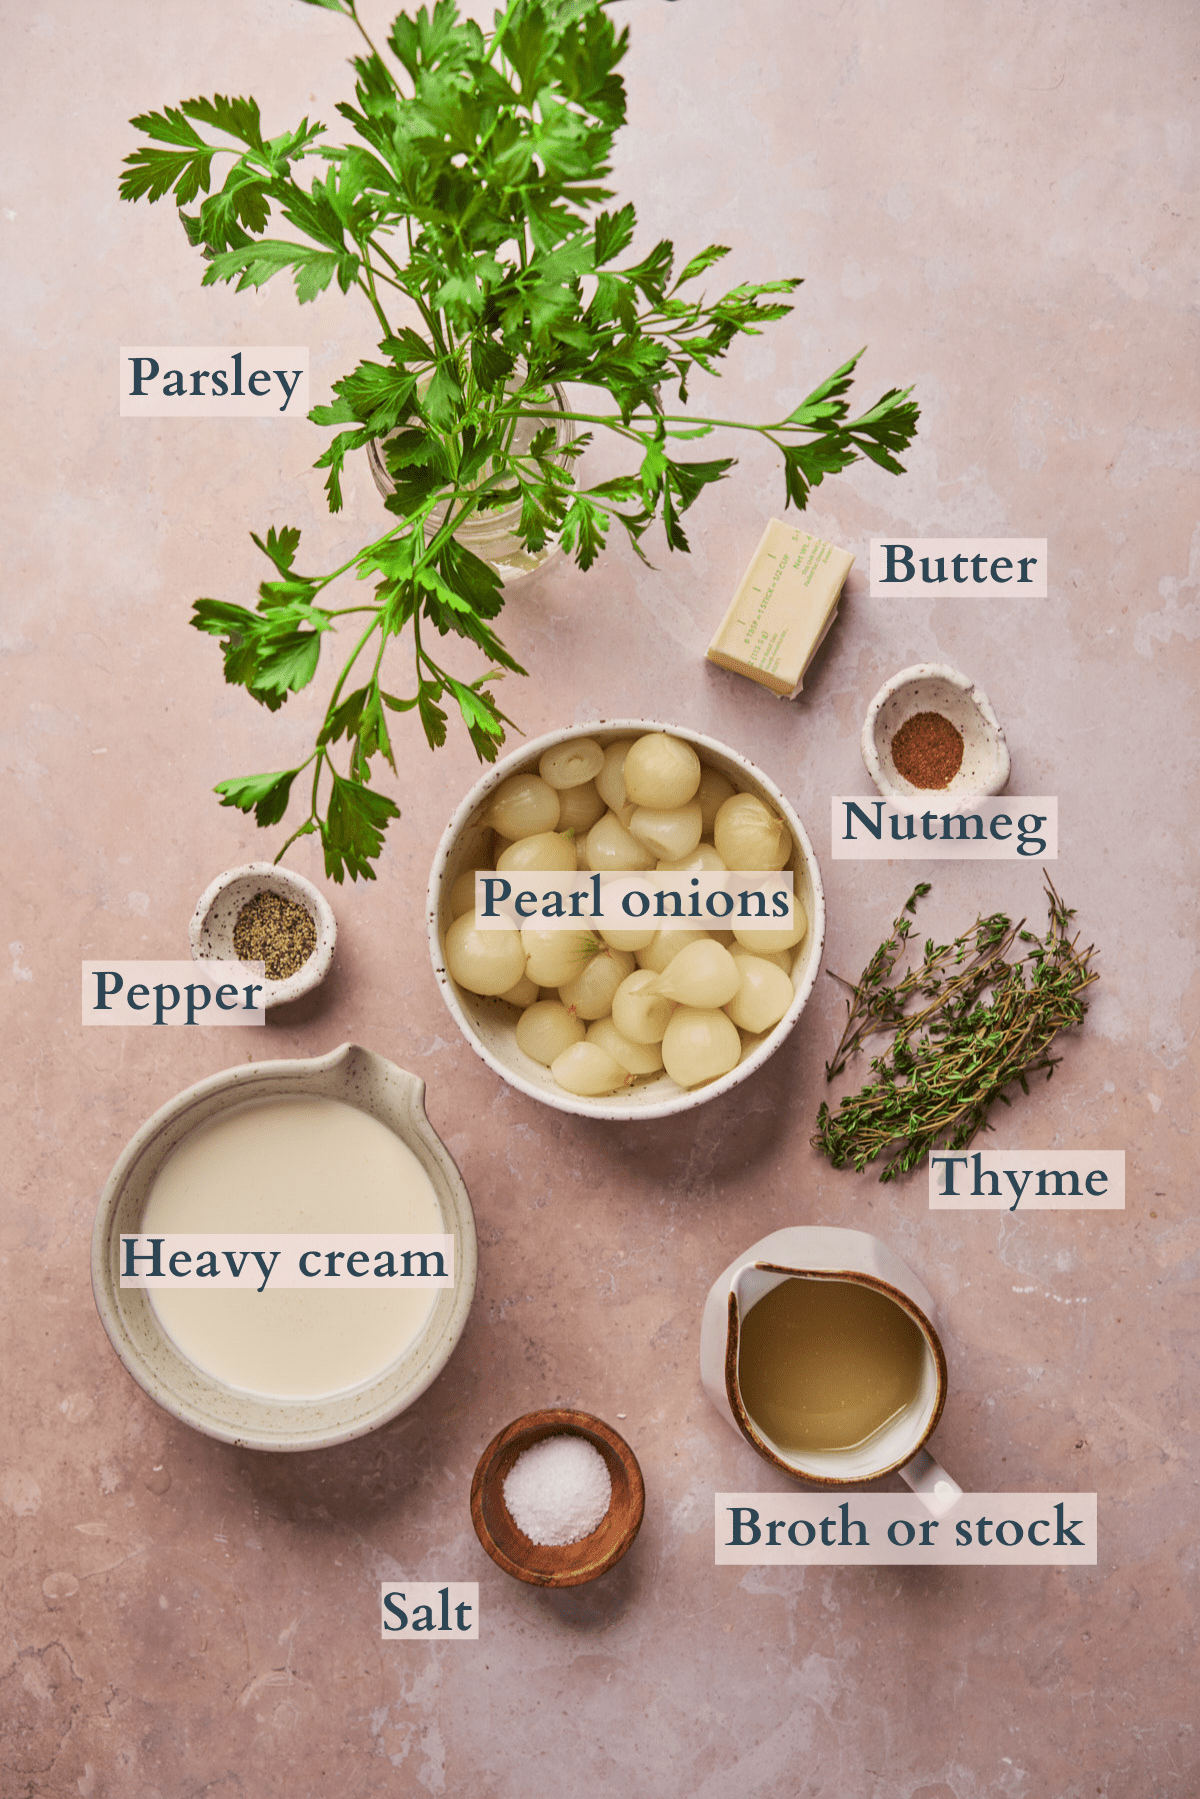 creamed pearl onions ingredients graphic with text to denote the pearl onions, heavy cream, butter, salt, pepper, nutmeg, chicken broth, thyme, and parsley. 